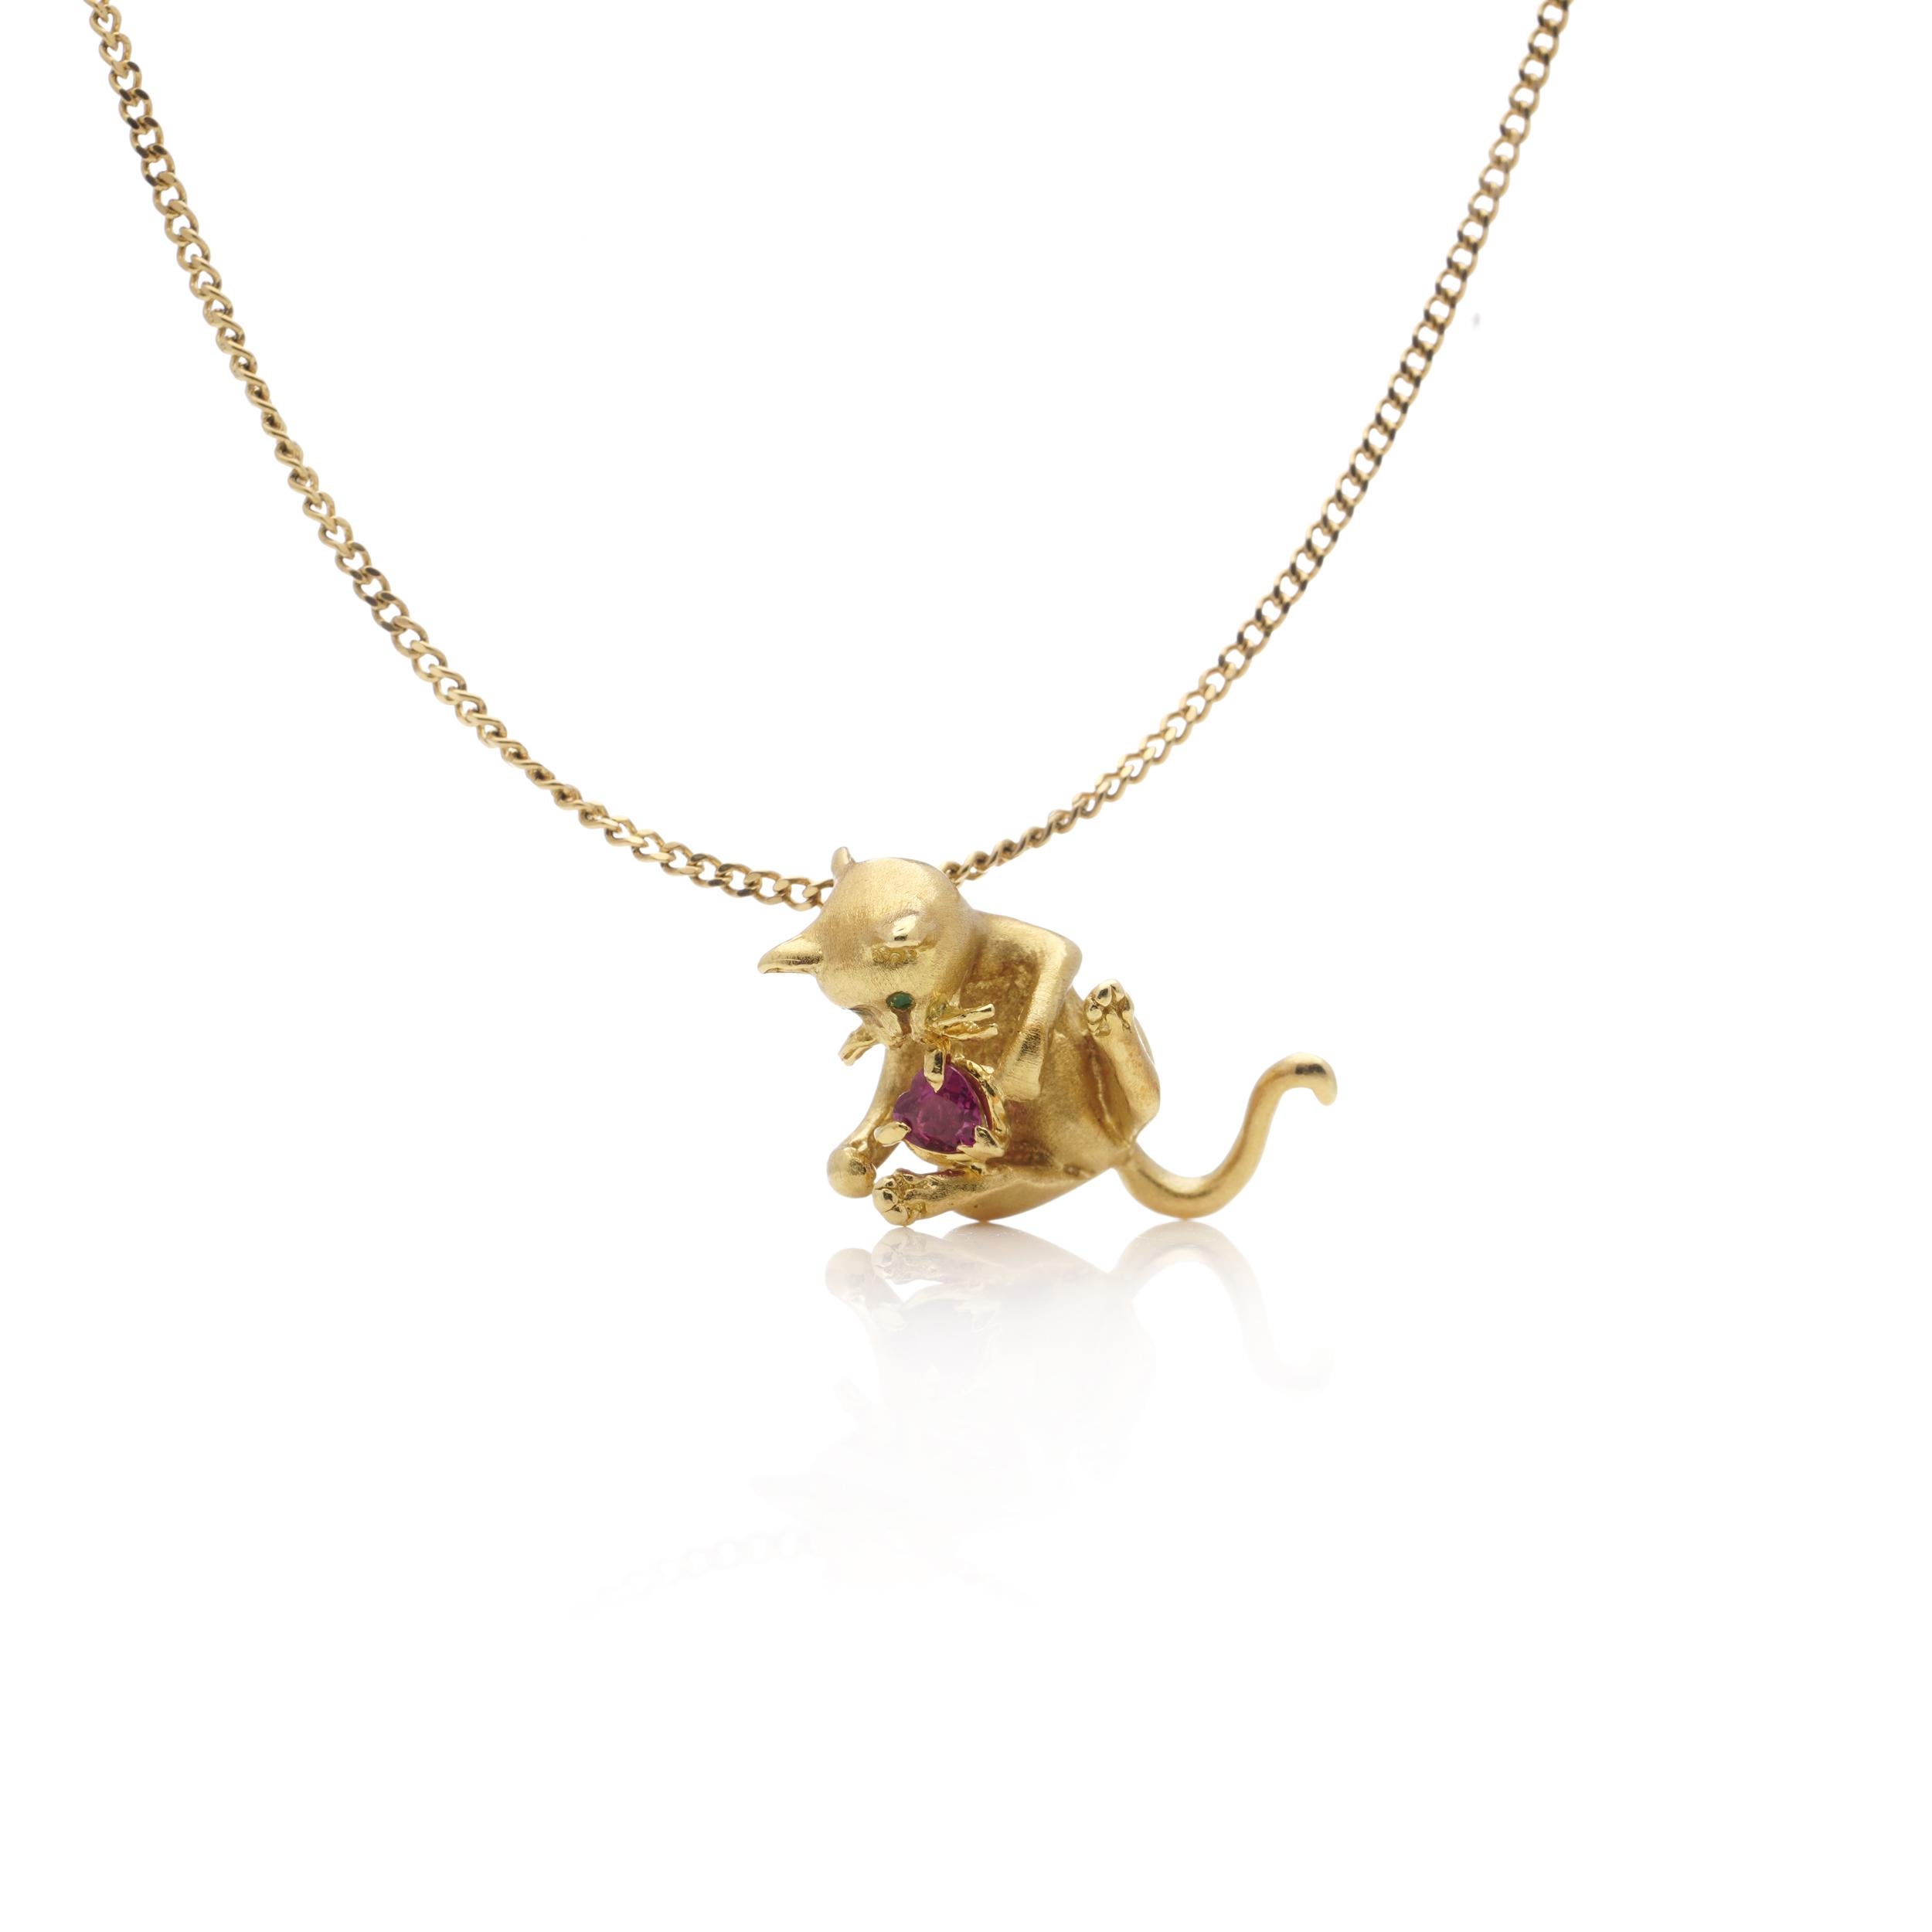 Fred Paris 18kt. yellow gold chain necklace with kitty holding ruby pendant 1